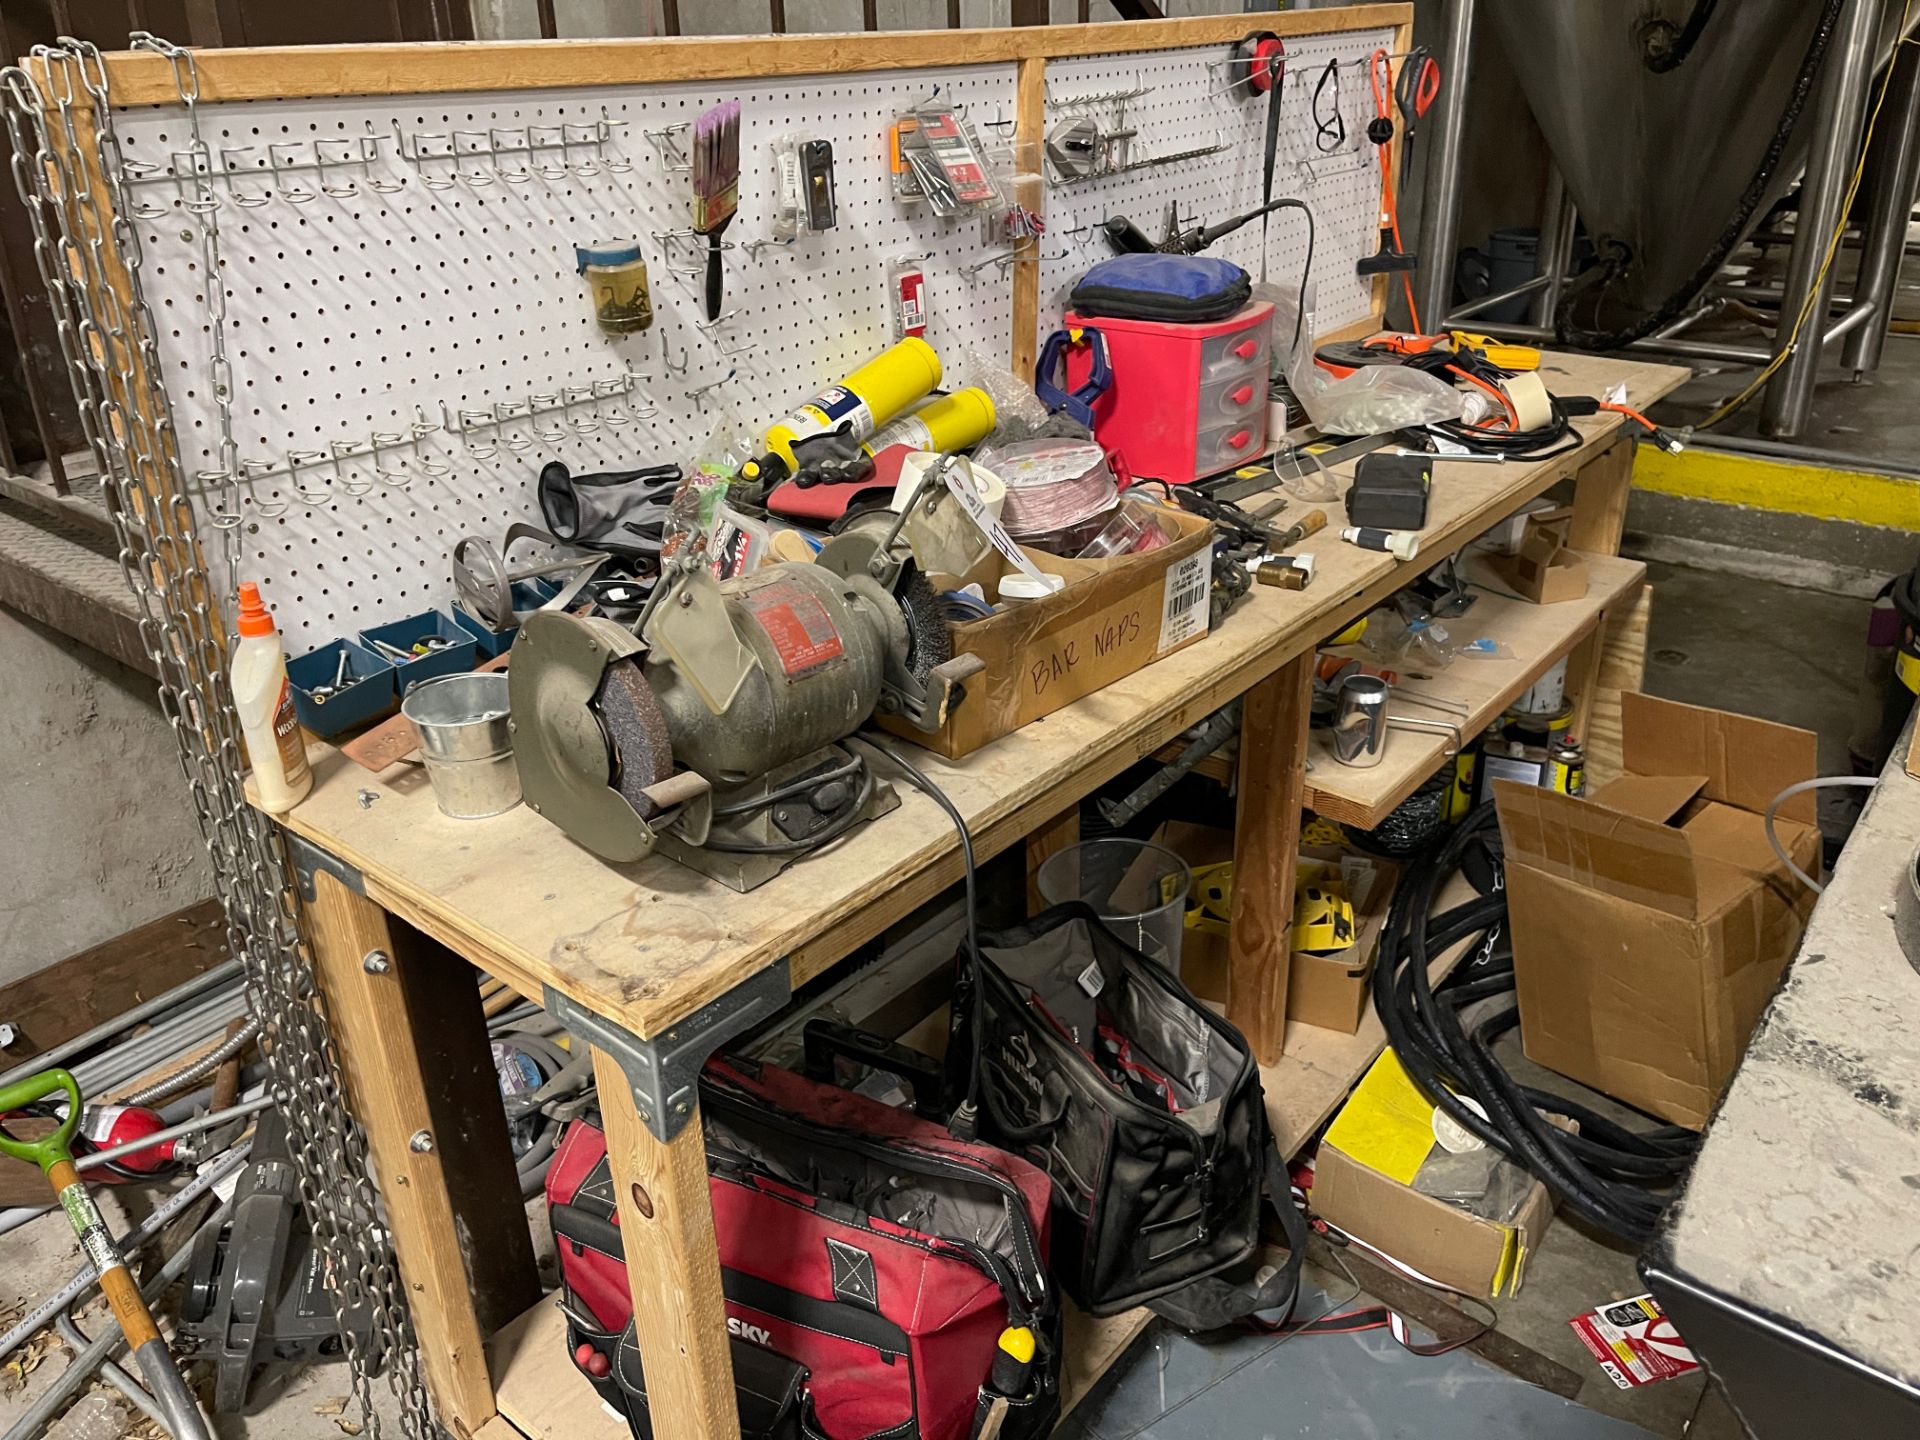 Lot of Contents of Work Bench Including Vise, Tool Bags, and Assorted Tools | Rig Fee $200